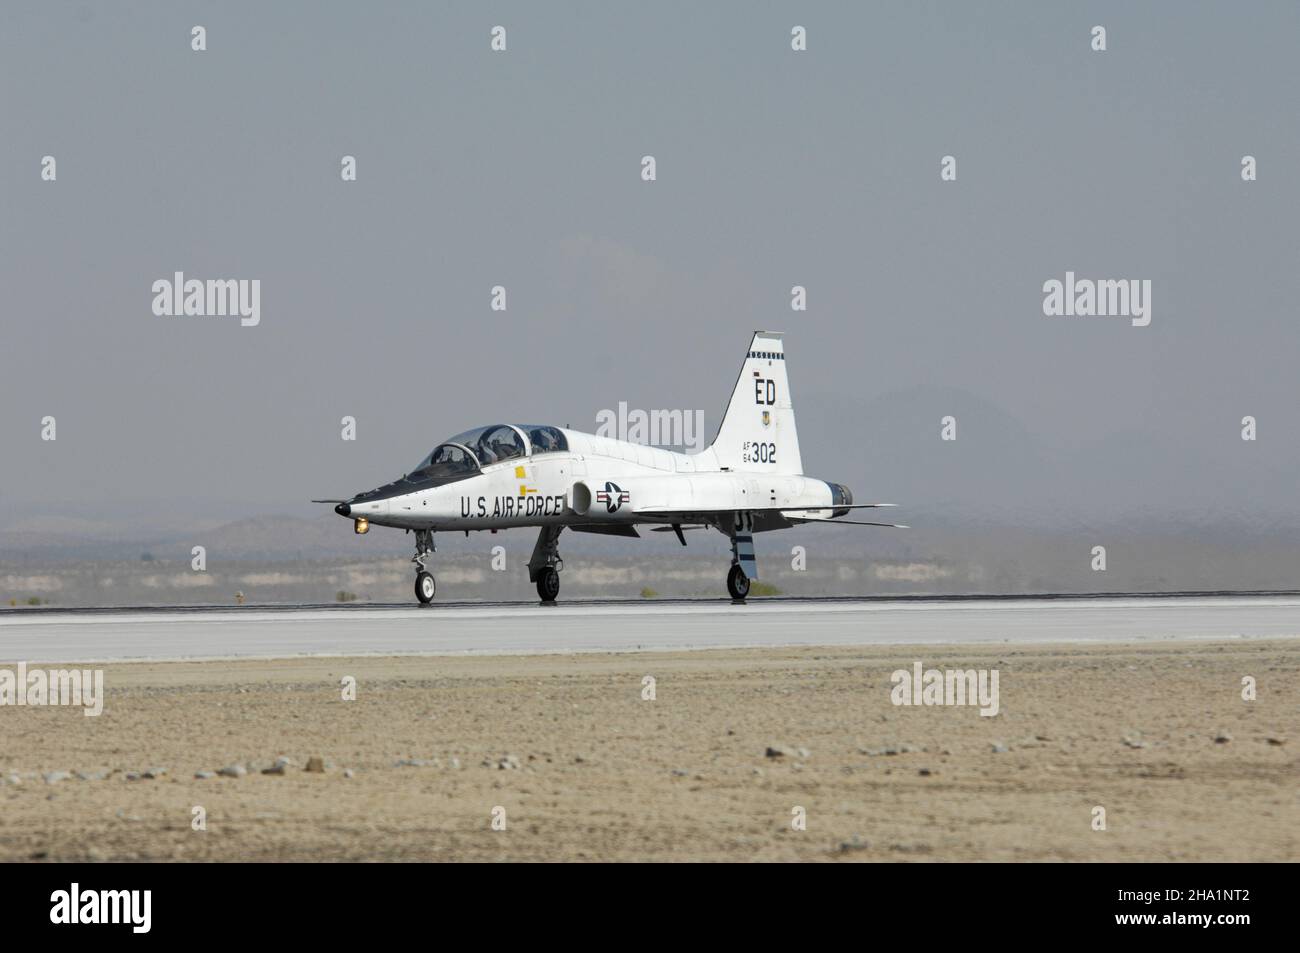 United States Air Force T-38 taxis after landing at Edwards Air Force Base in California. Stock Photo